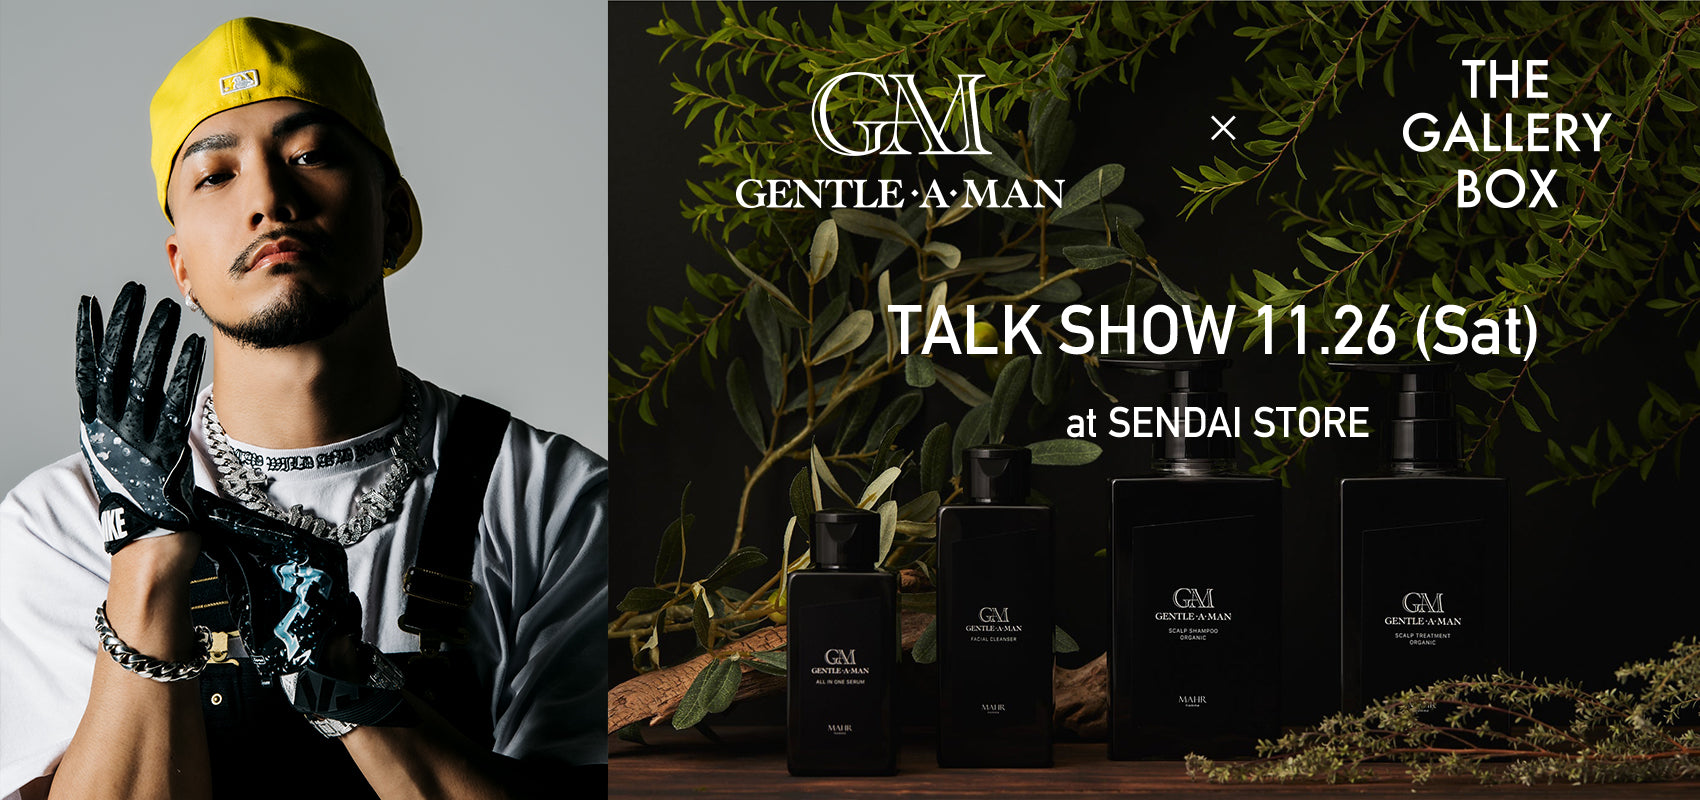 THE GALLERY BOX × GENTLE.A.MAN at SENDAI STORE